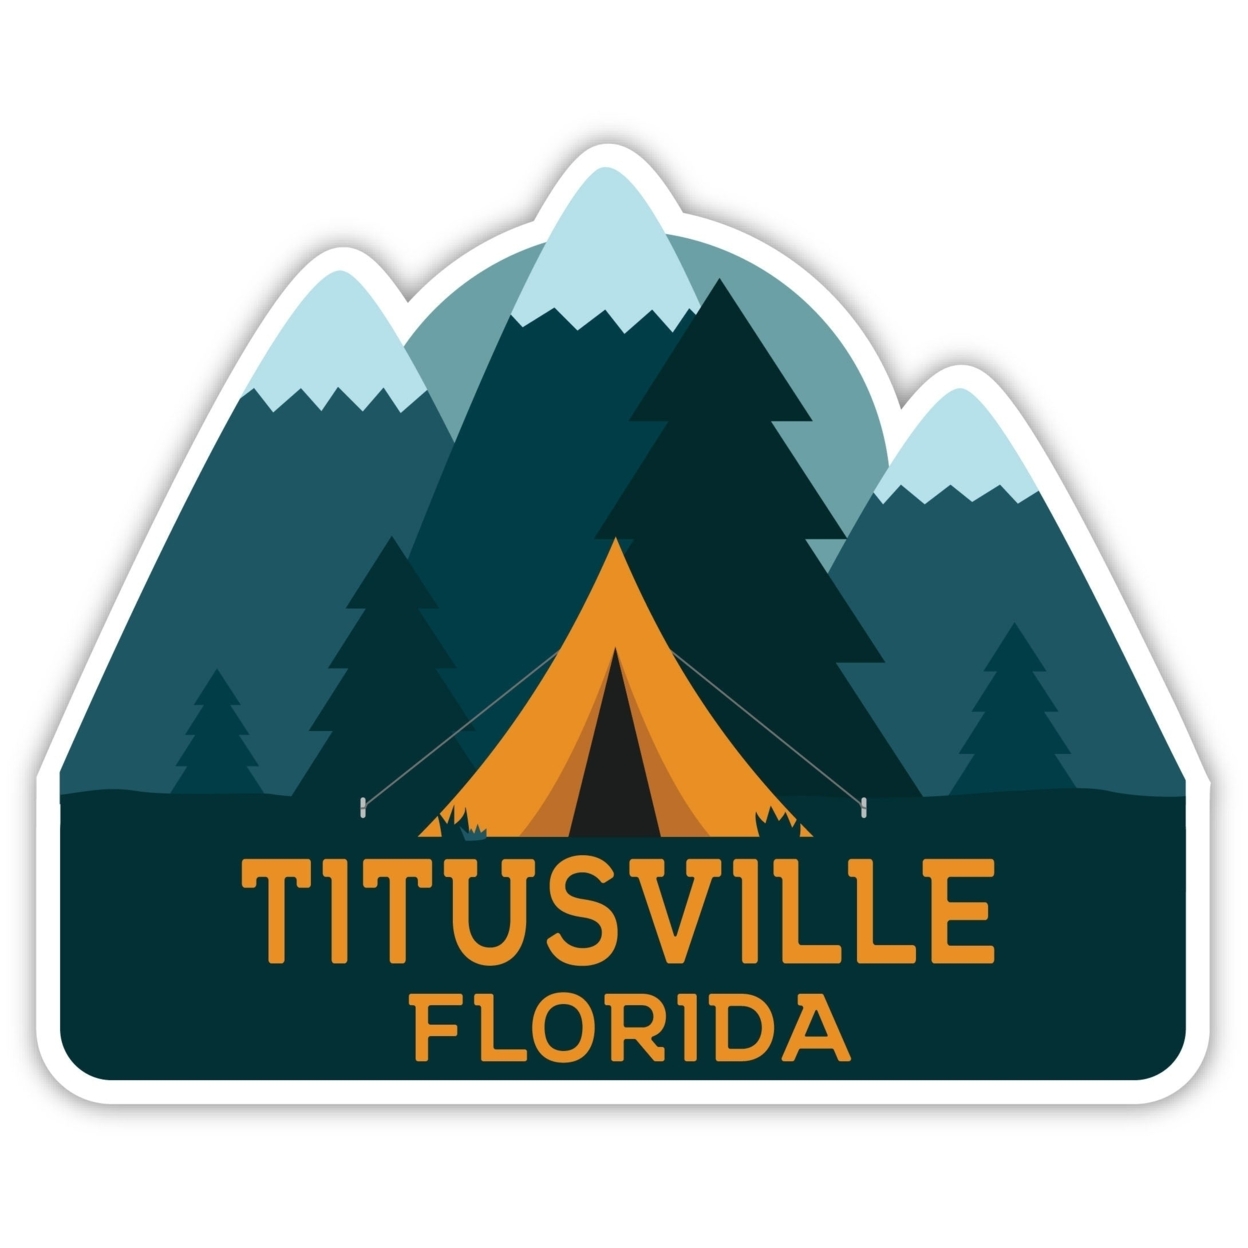 Titusville Florida Souvenir Decorative Stickers (Choose Theme And Size) - Single Unit, 2-Inch, Great Outdoors